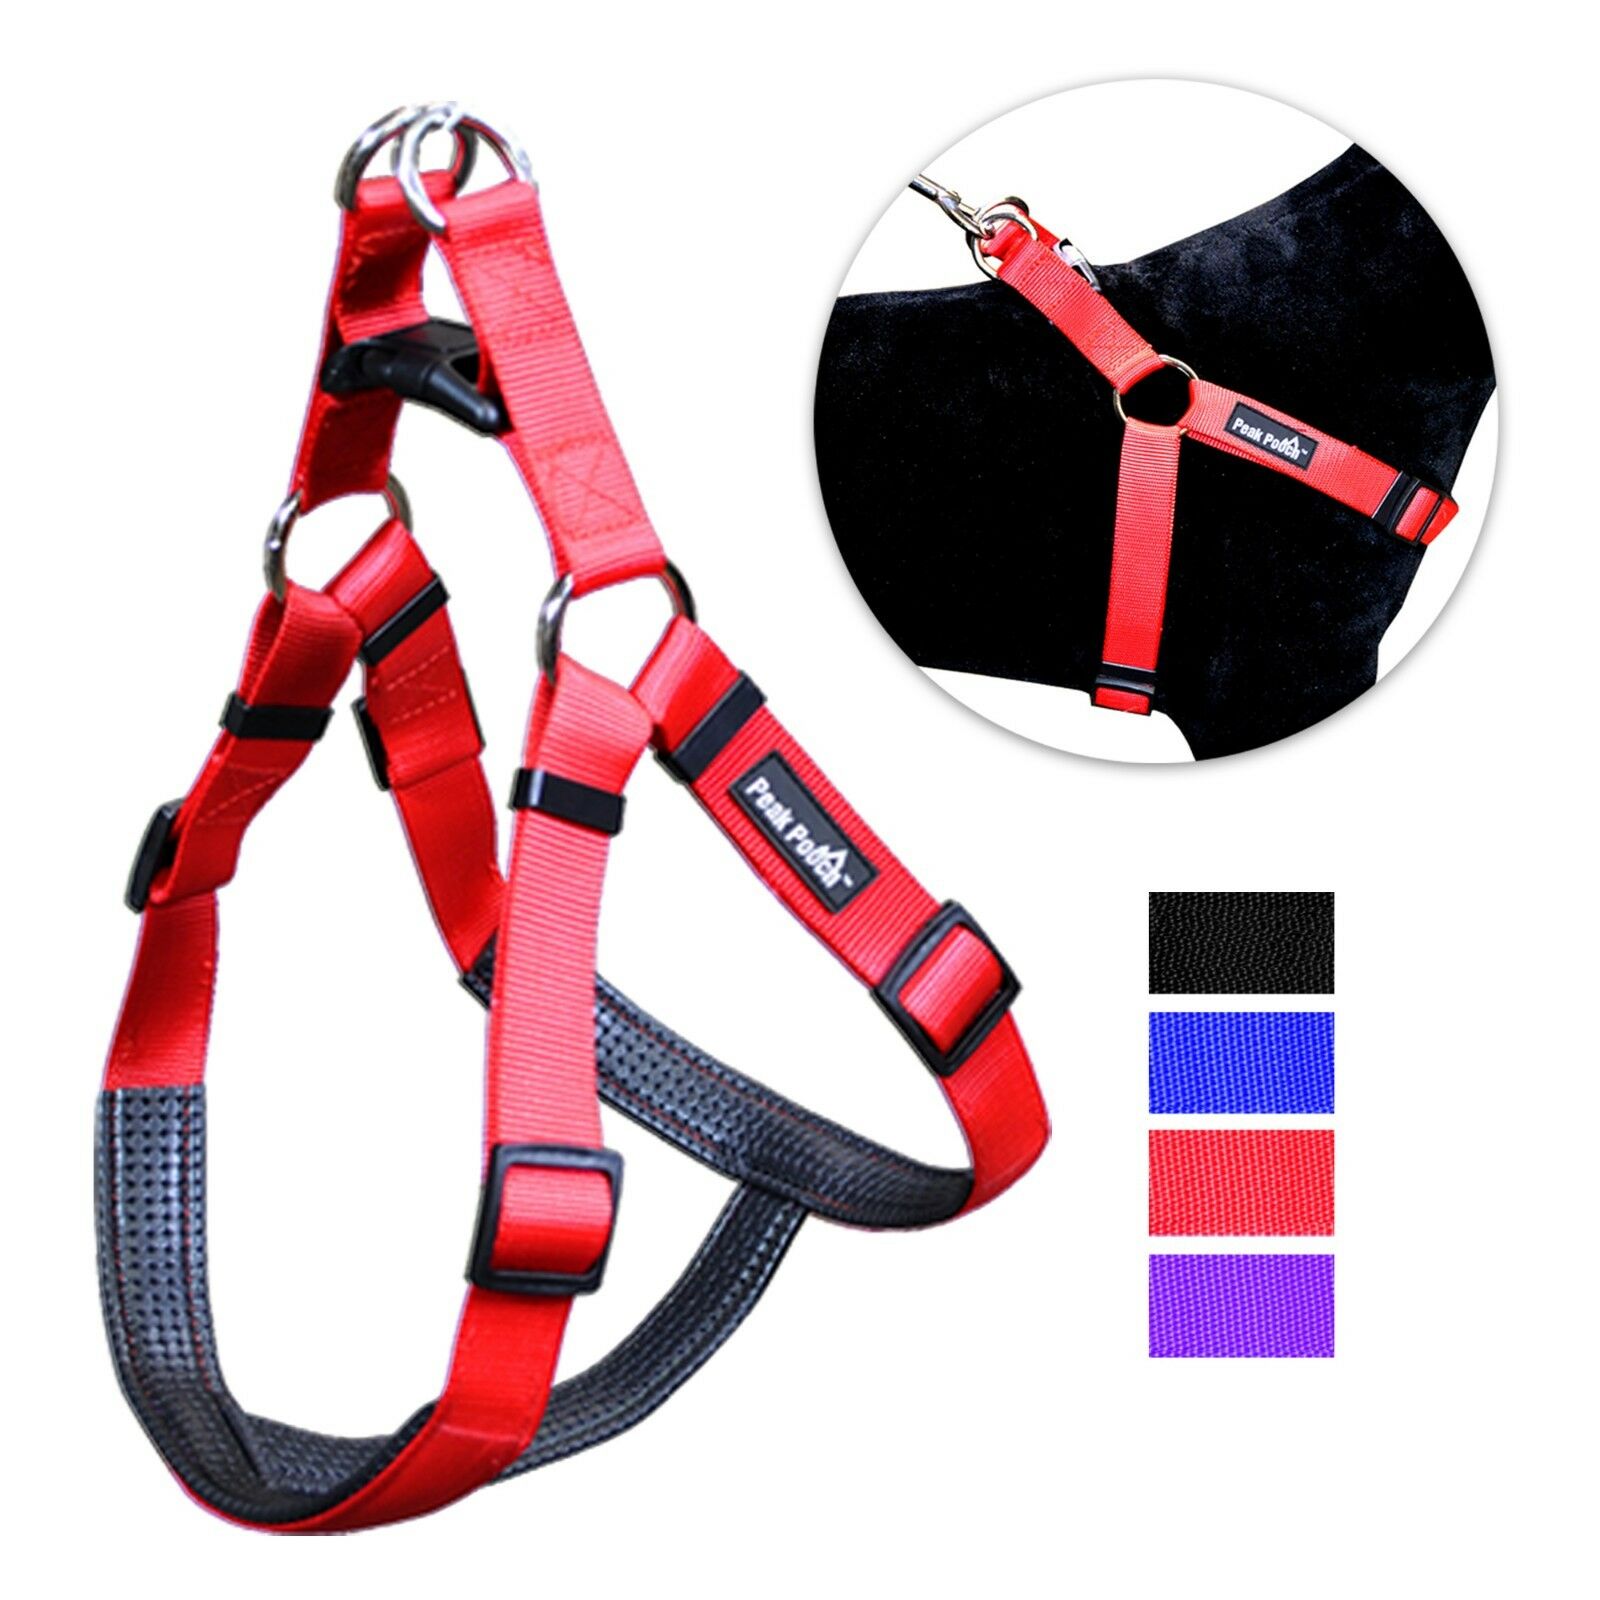 No Pull Padded Comfort Nylon Dog Walking Harness For Small Medium And Large Dogs